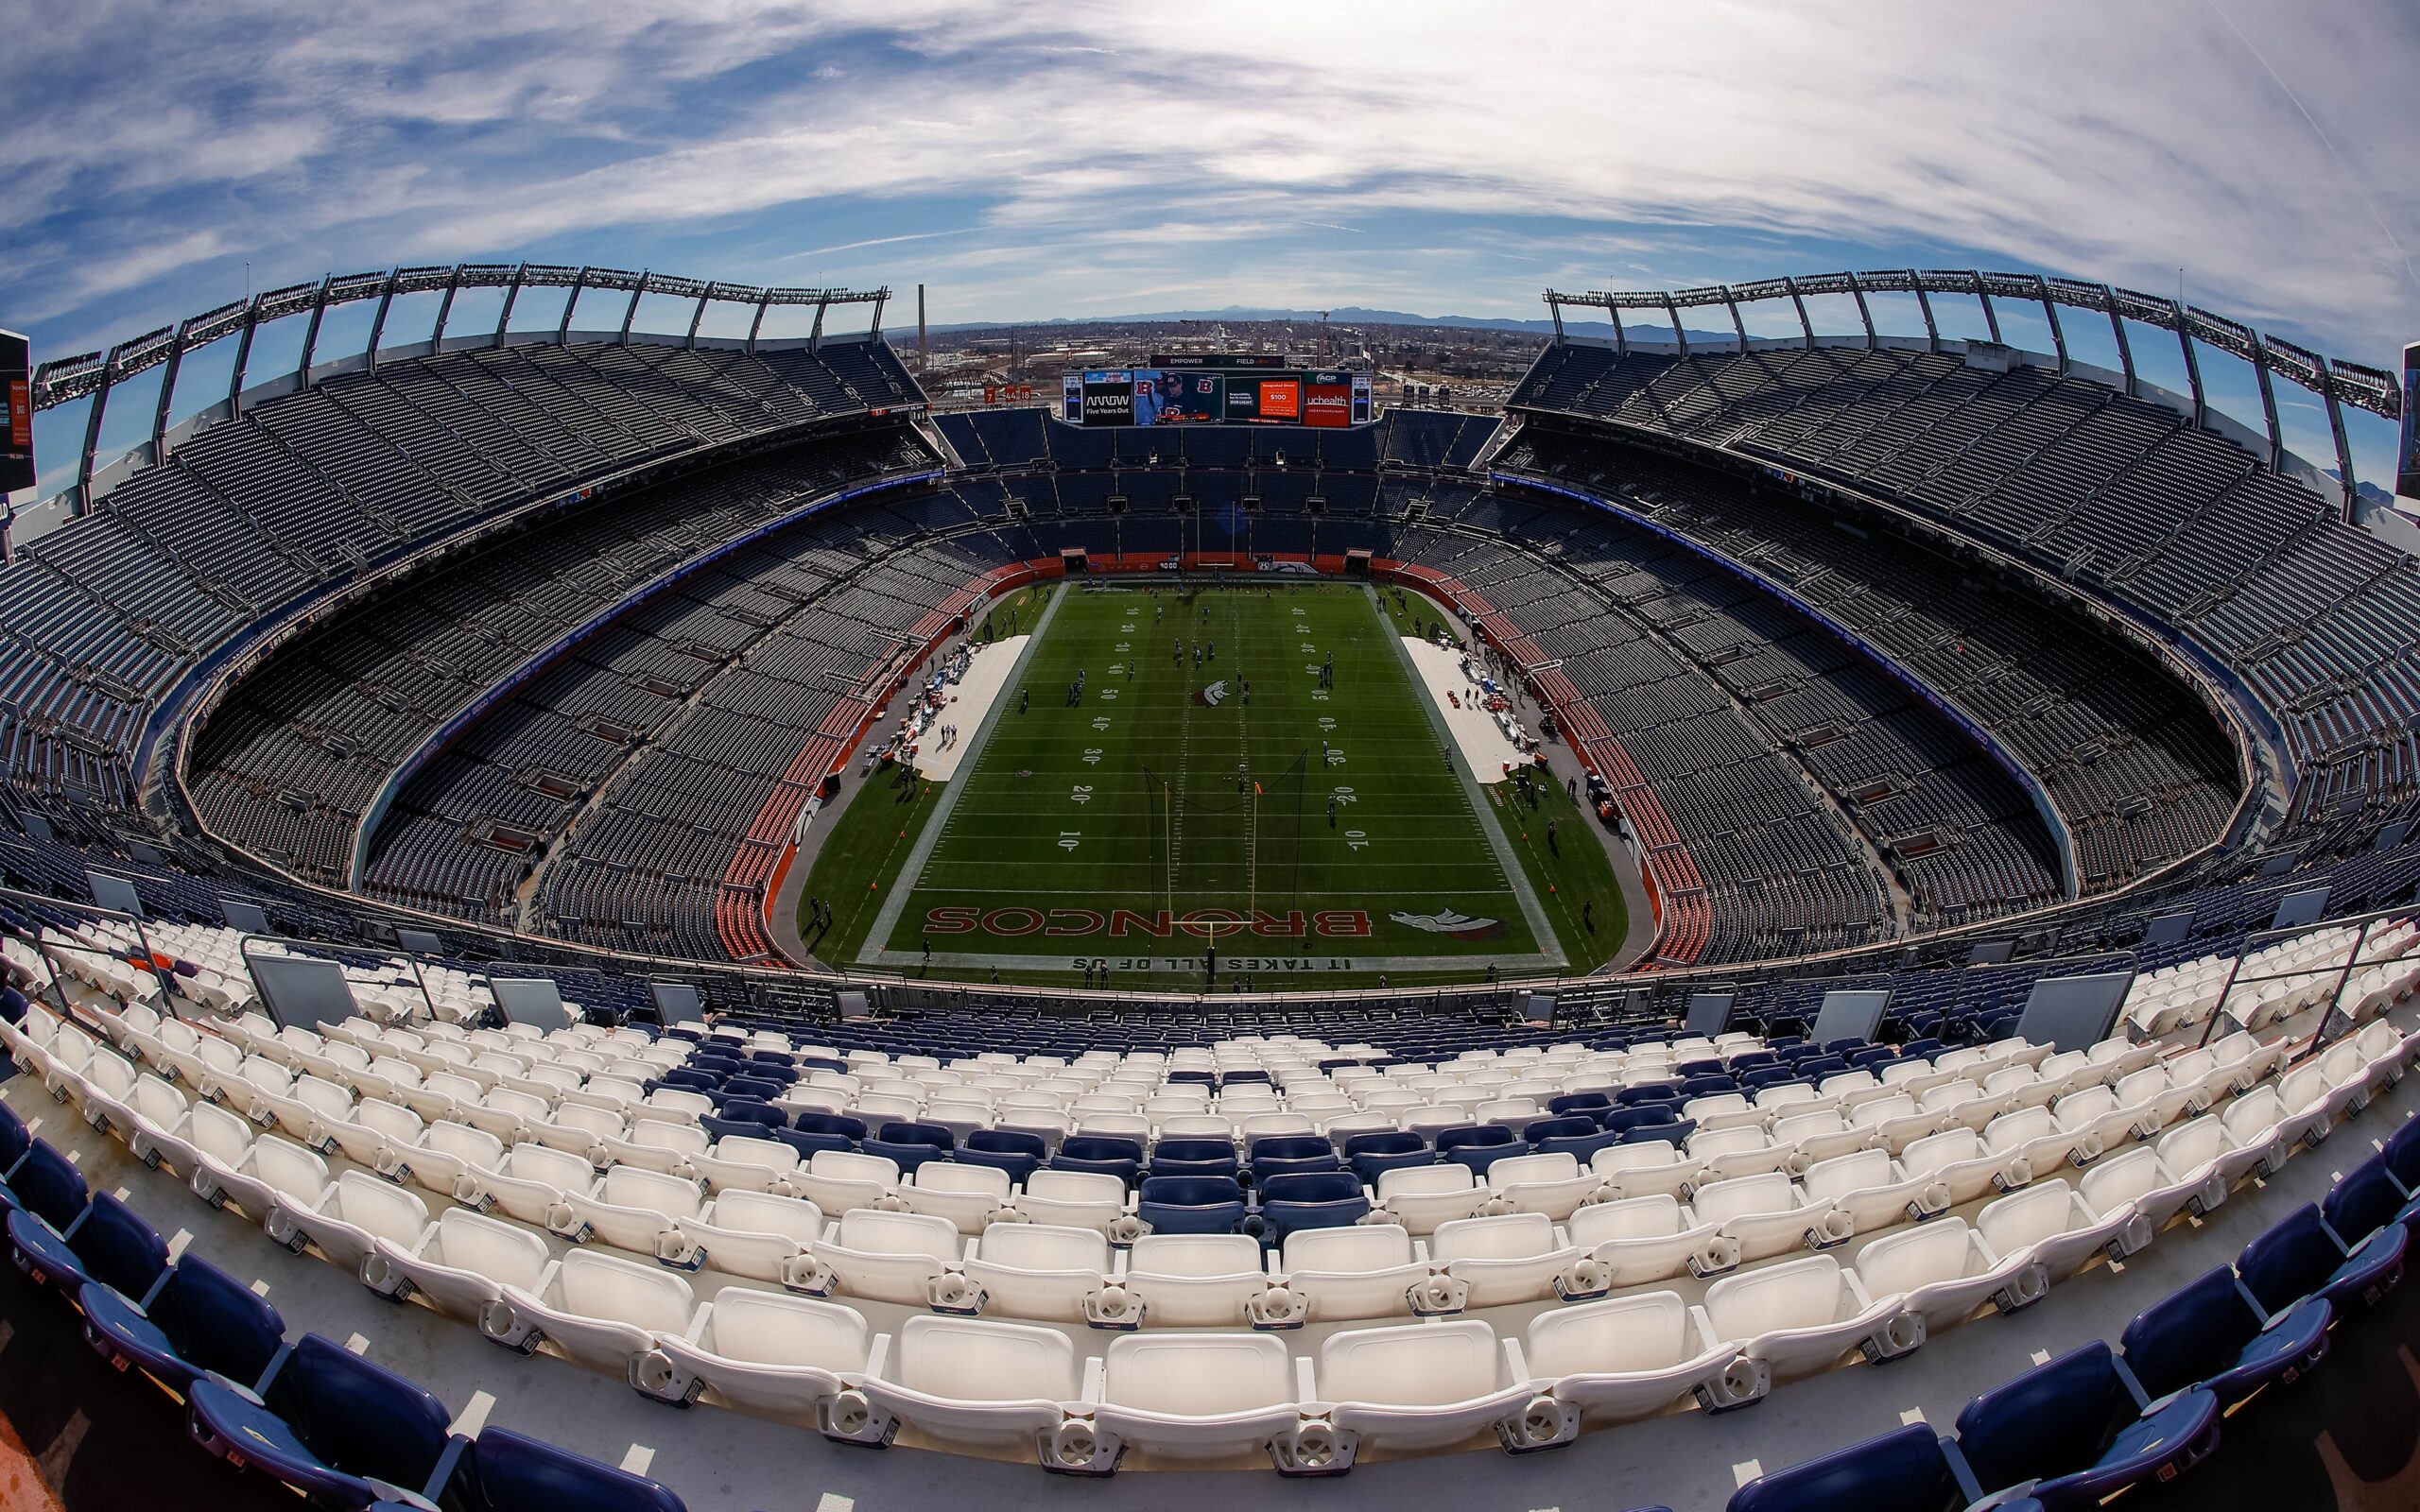 It's possible Denver Broncos won't get a new stadium for 10 years